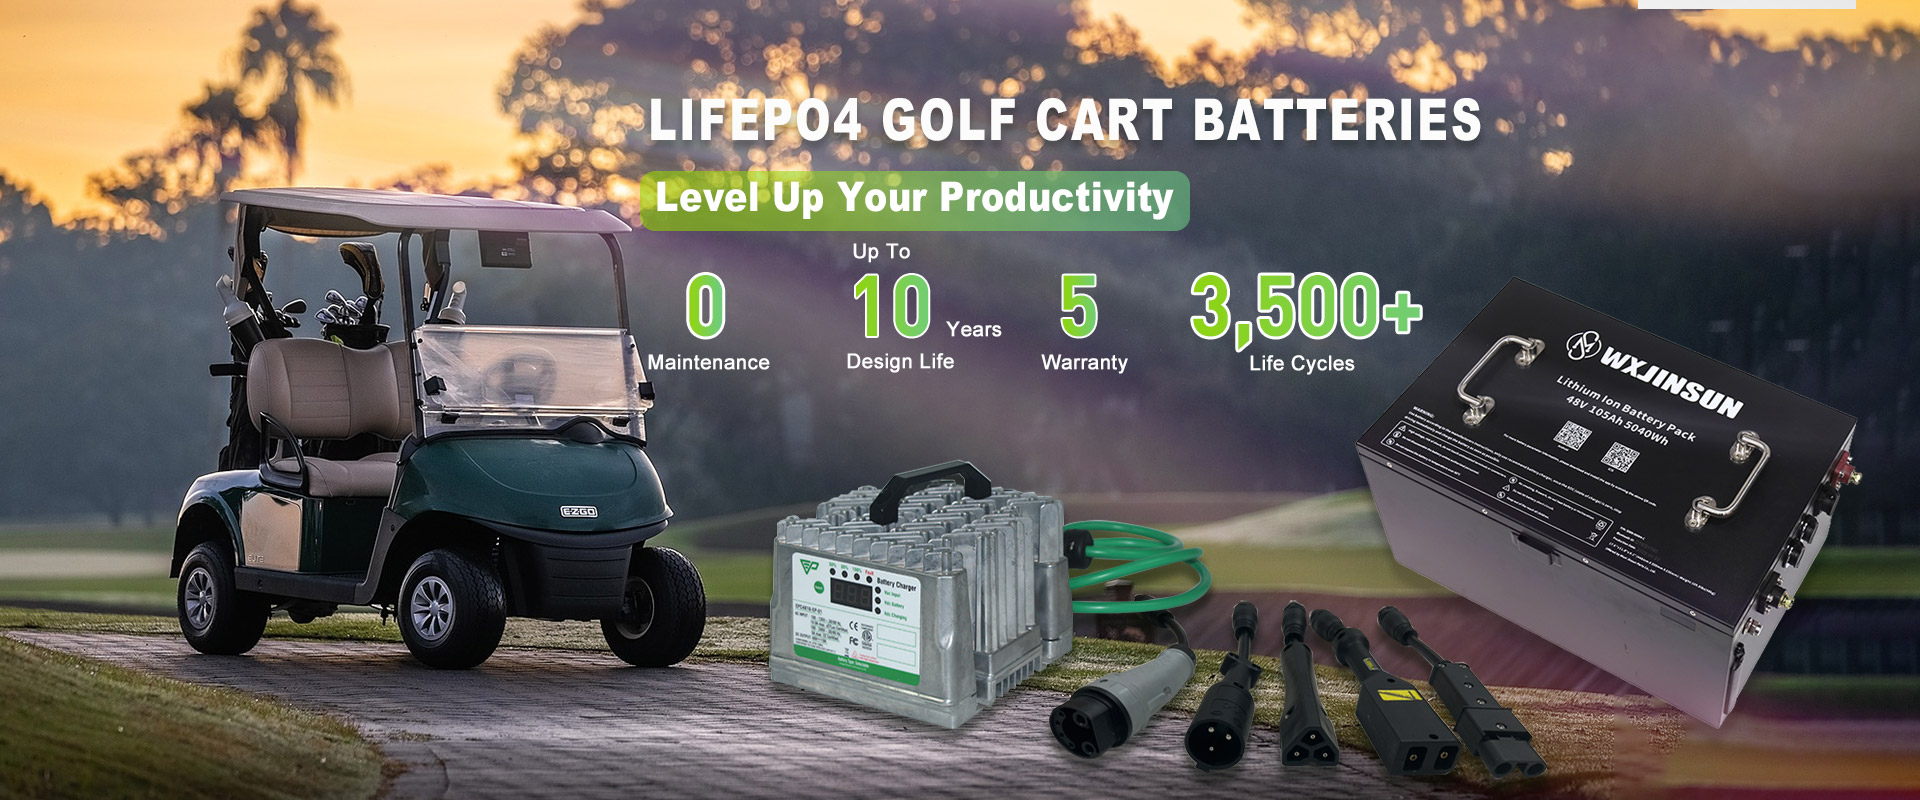 High Quality Golf Cart Parts & Accessories From Jinsun Parts